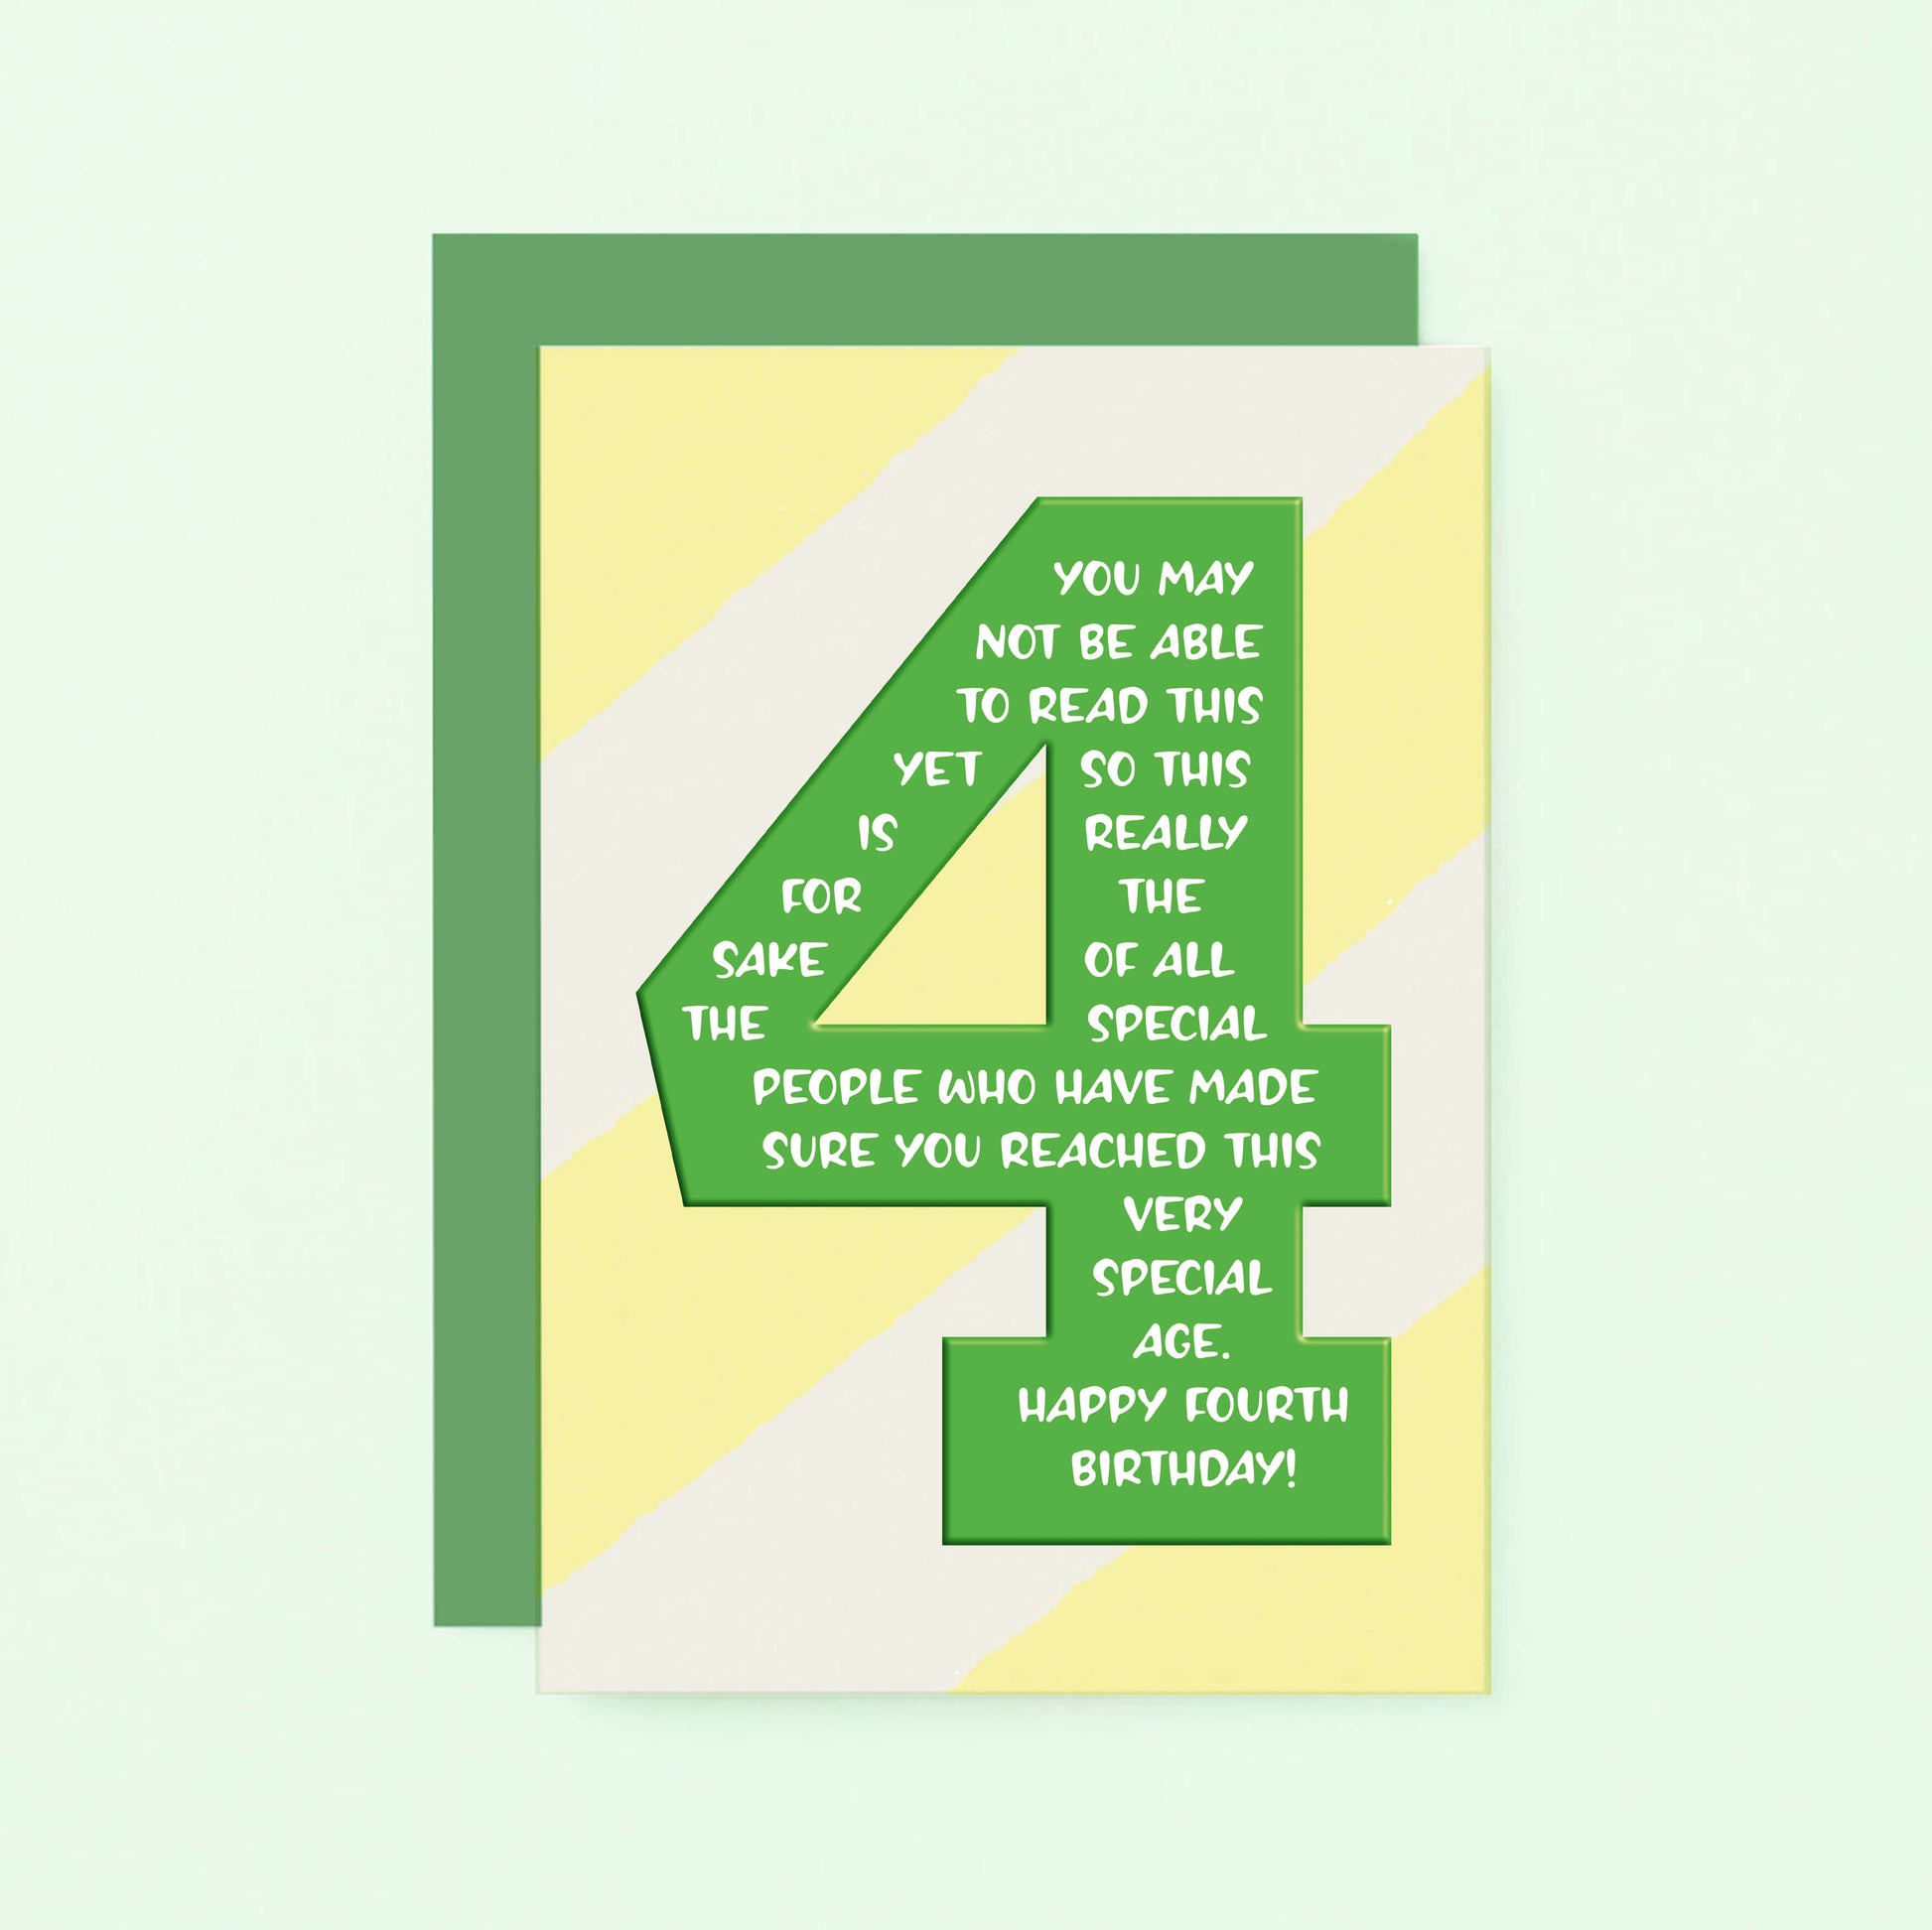 4th Birthday Card by SixElevenCreations. You may not be able to read this yet so this is really for the sake of all the special people who have made sure you reached this very special age. Happy Fourth Birthday! Product Code SE6004A6